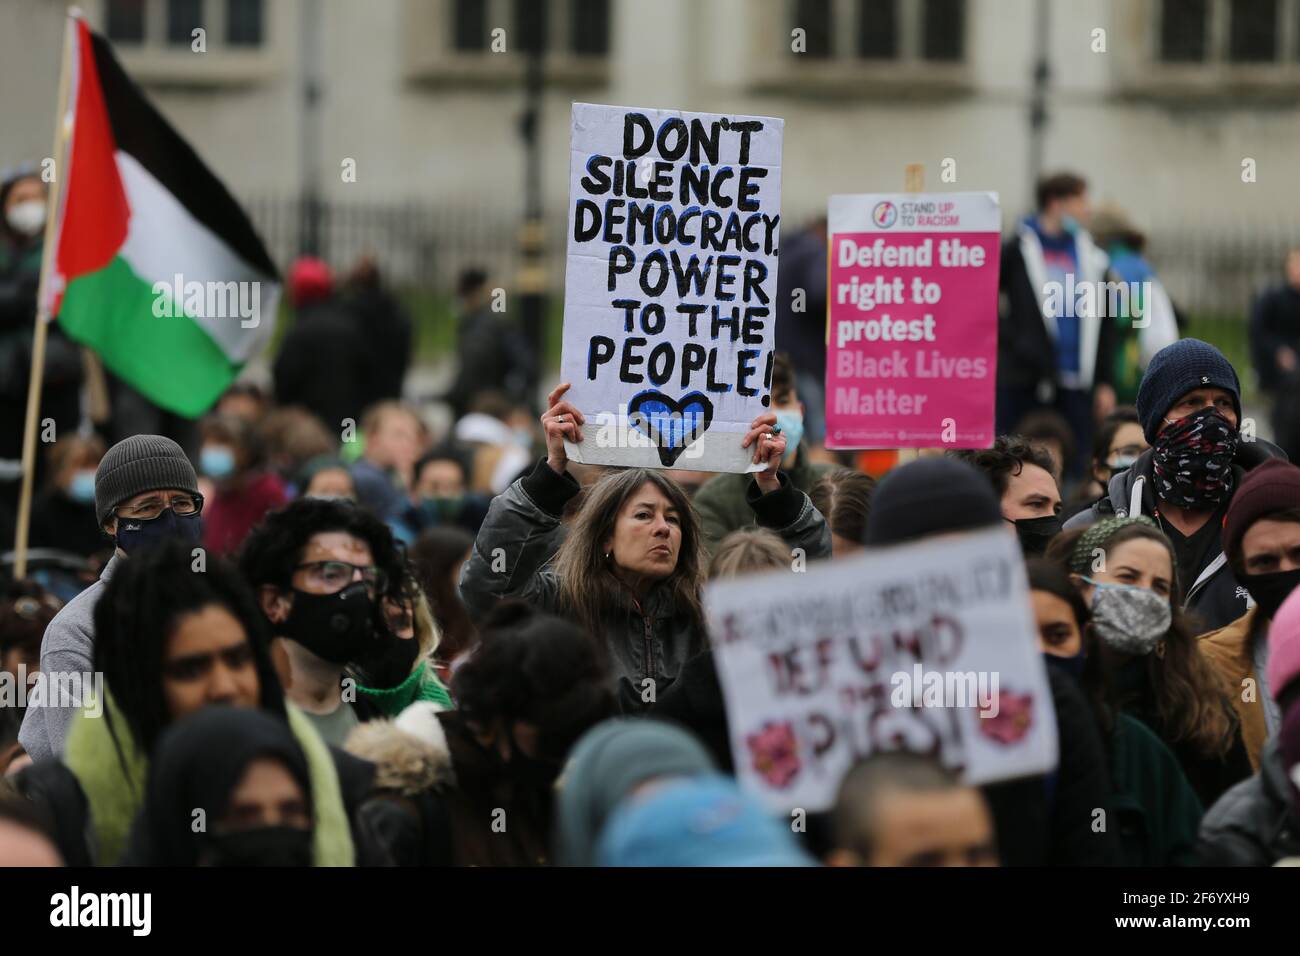 London, England, UK. 3rd Apr, 2021. Protesters staged a demonstration in Parliament Square in London against the British government's proposed Police, Crime, Sentencing and Courts Bill that will give police more power to shutdown protests. Credit: Tayfun Salci/ZUMA Wire/Alamy Live News Stock Photo